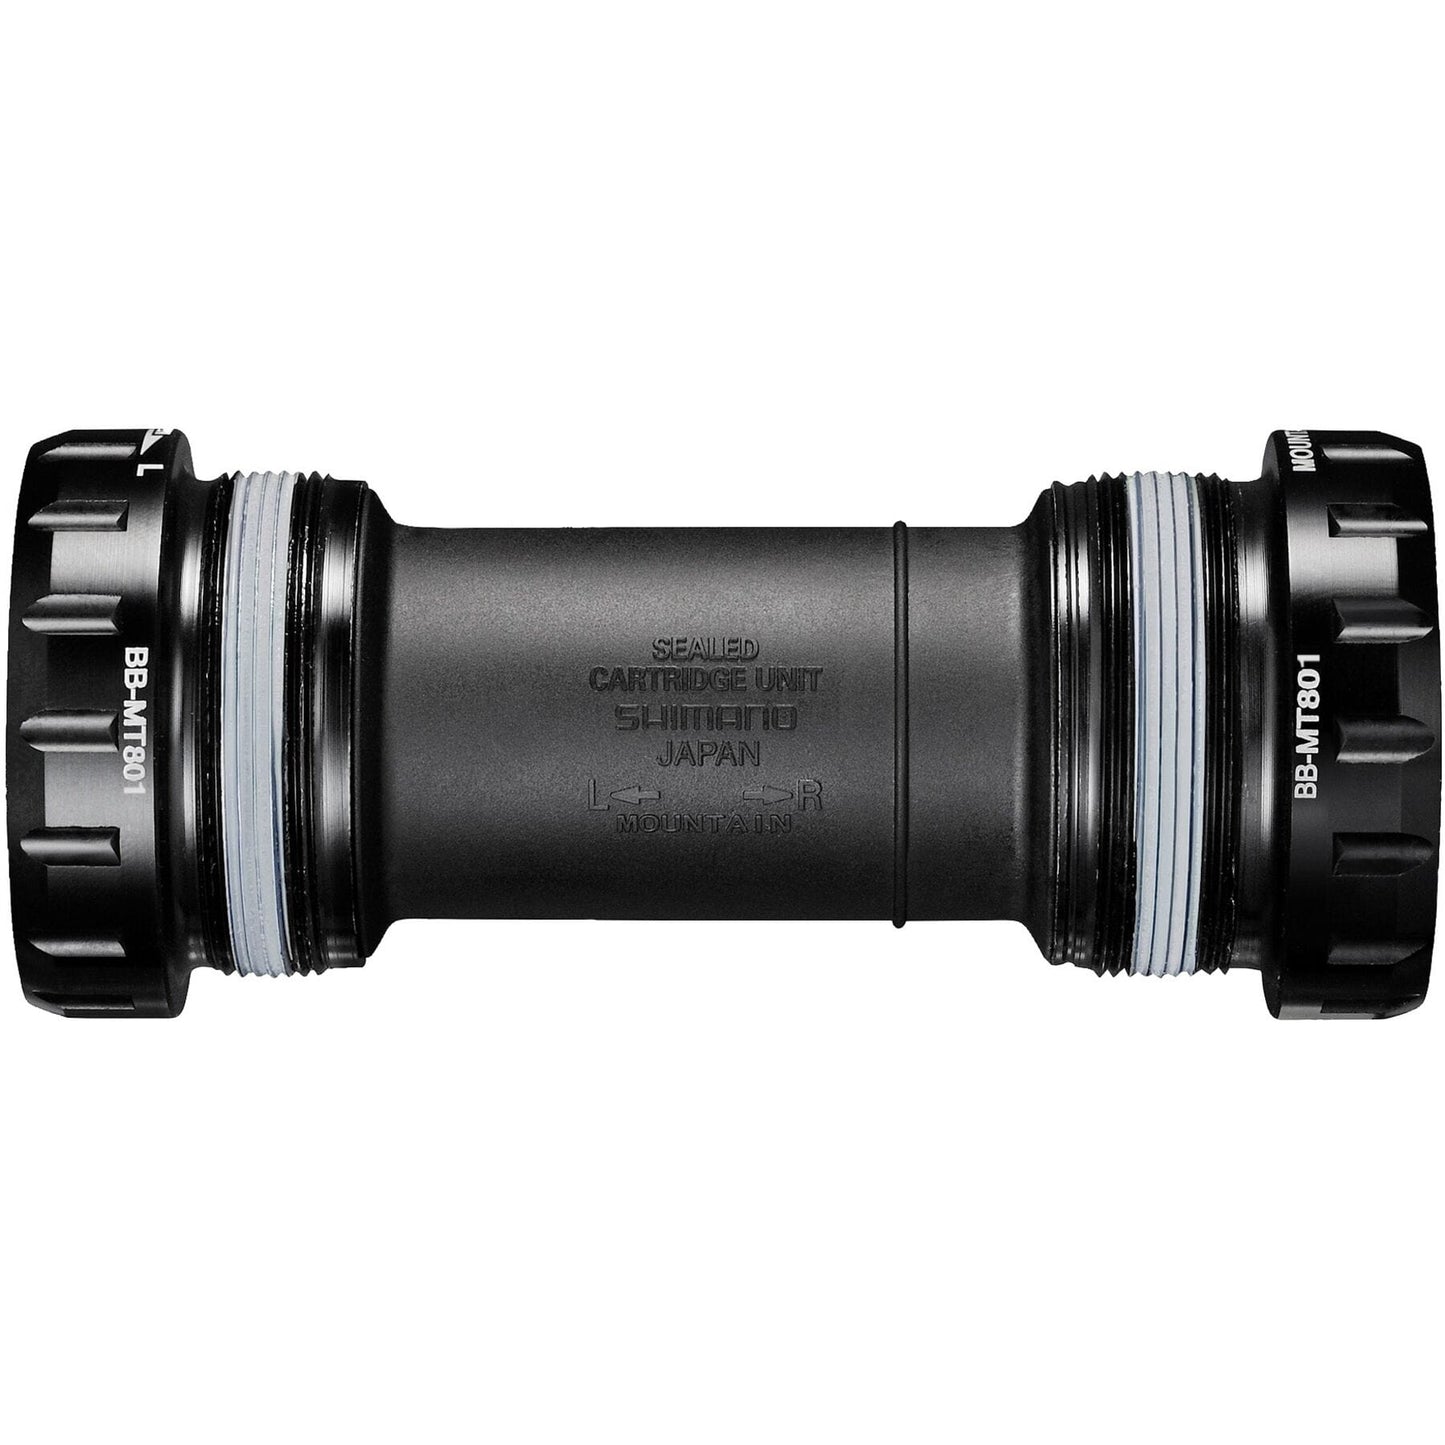 Shimano BB-MT801 Bottom Bracket Cups, for FC-MX70 / MX71 HollowTech II Chainset, 68 mm